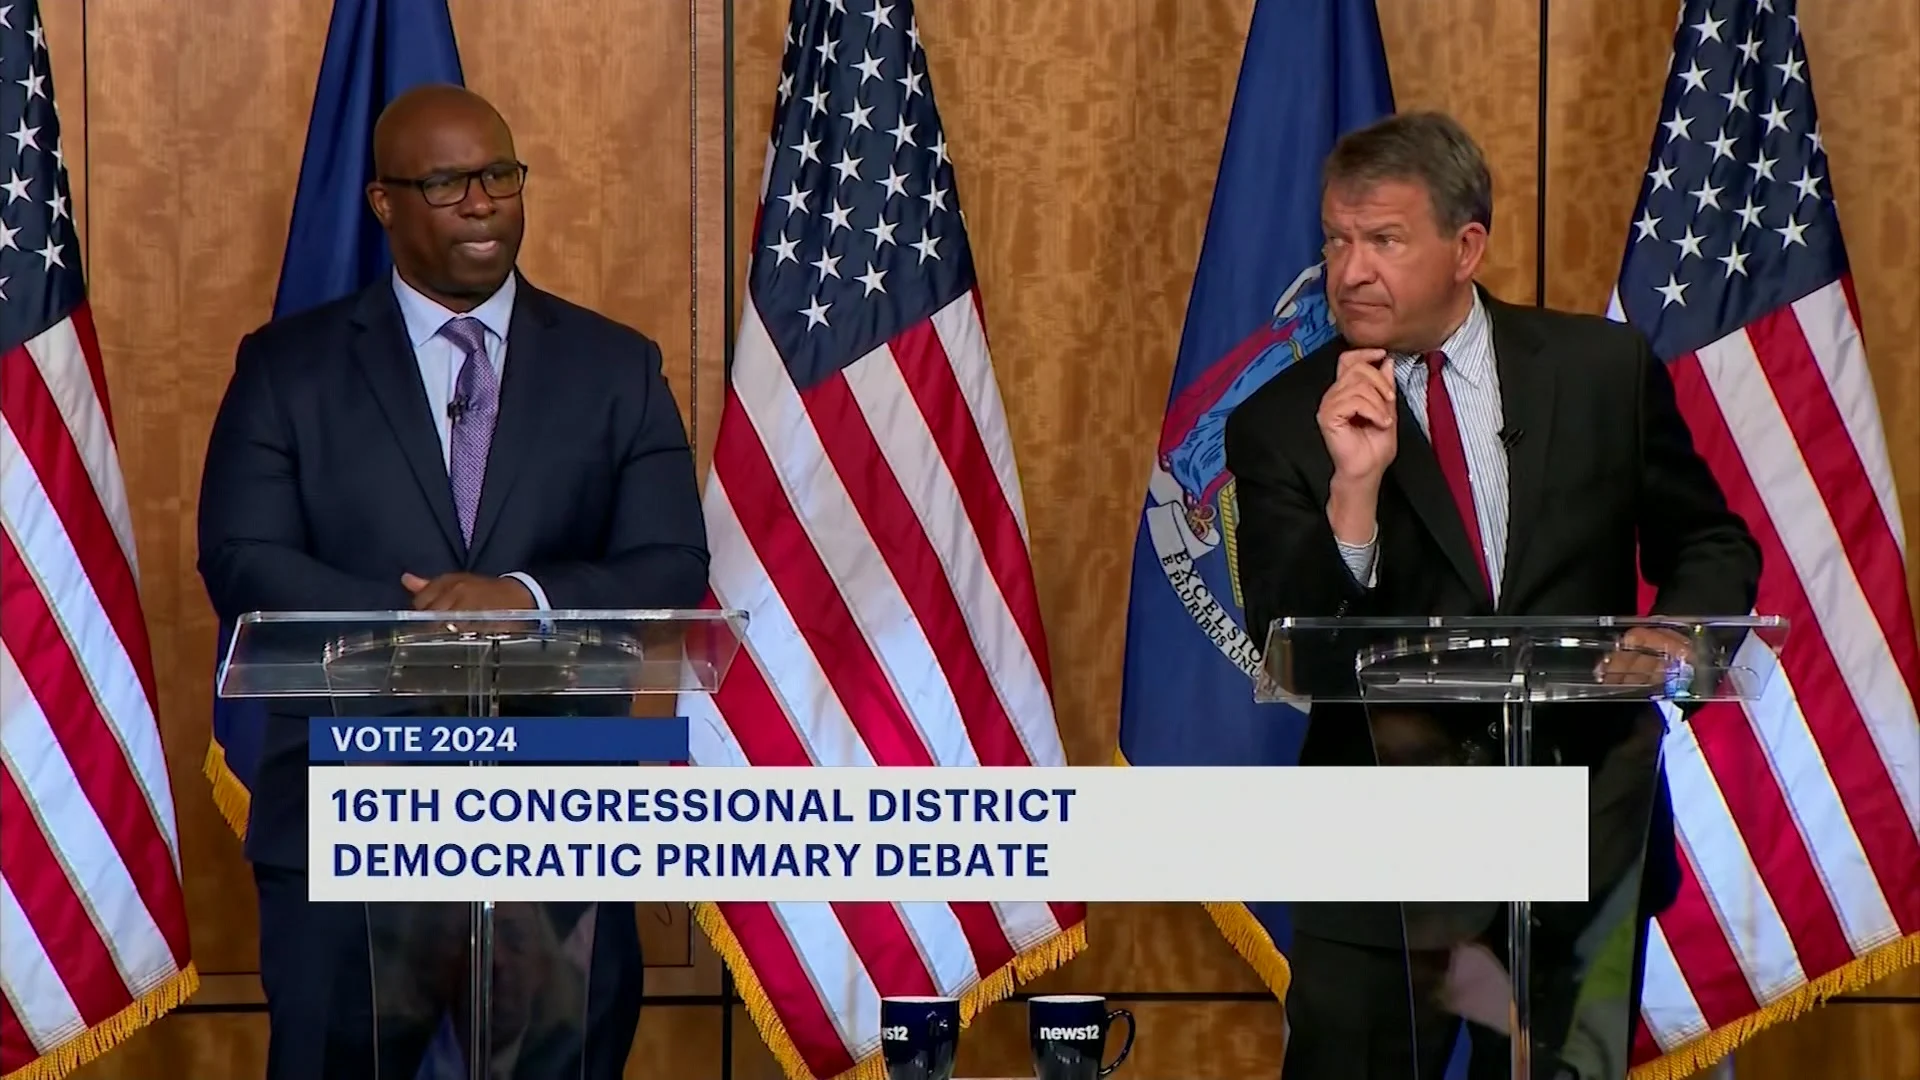 Latimer and Bowman square off in News 12 debate for Democratic nod in 16th Congressional District